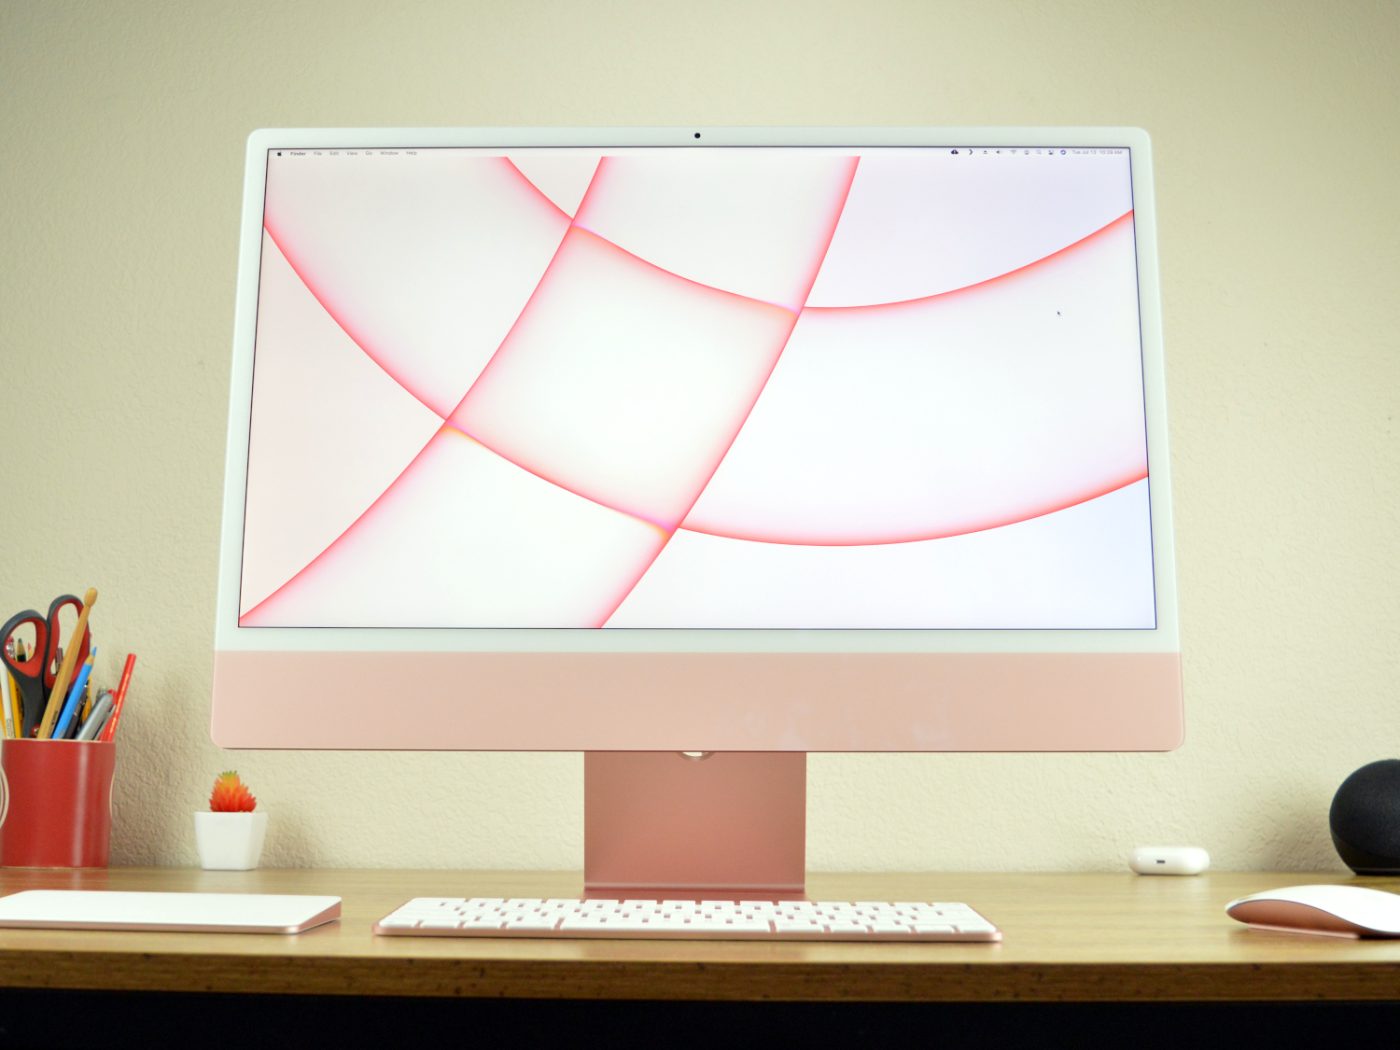 Apple iMac (24-Inch, 2021) Review: Powerful and Colorful